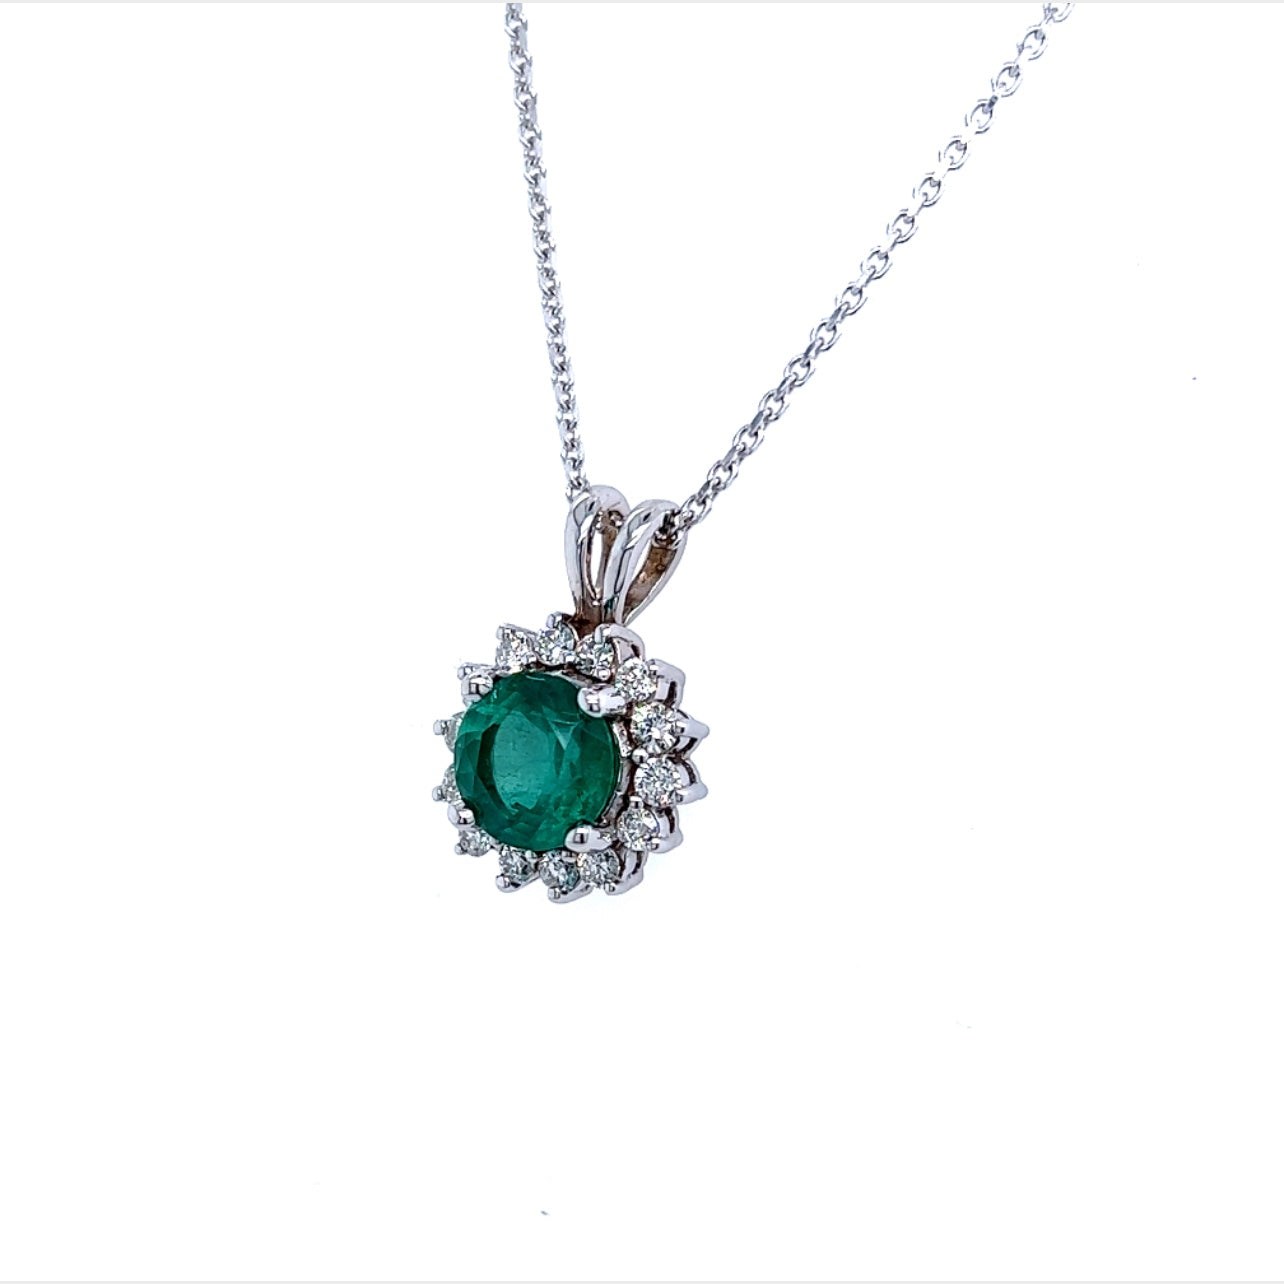 Natural Emerald Diamond Pendant With Chain 17.5" 14k White Gold 2 TCW Certified $5,950 216664 - Certified Fine Jewelry